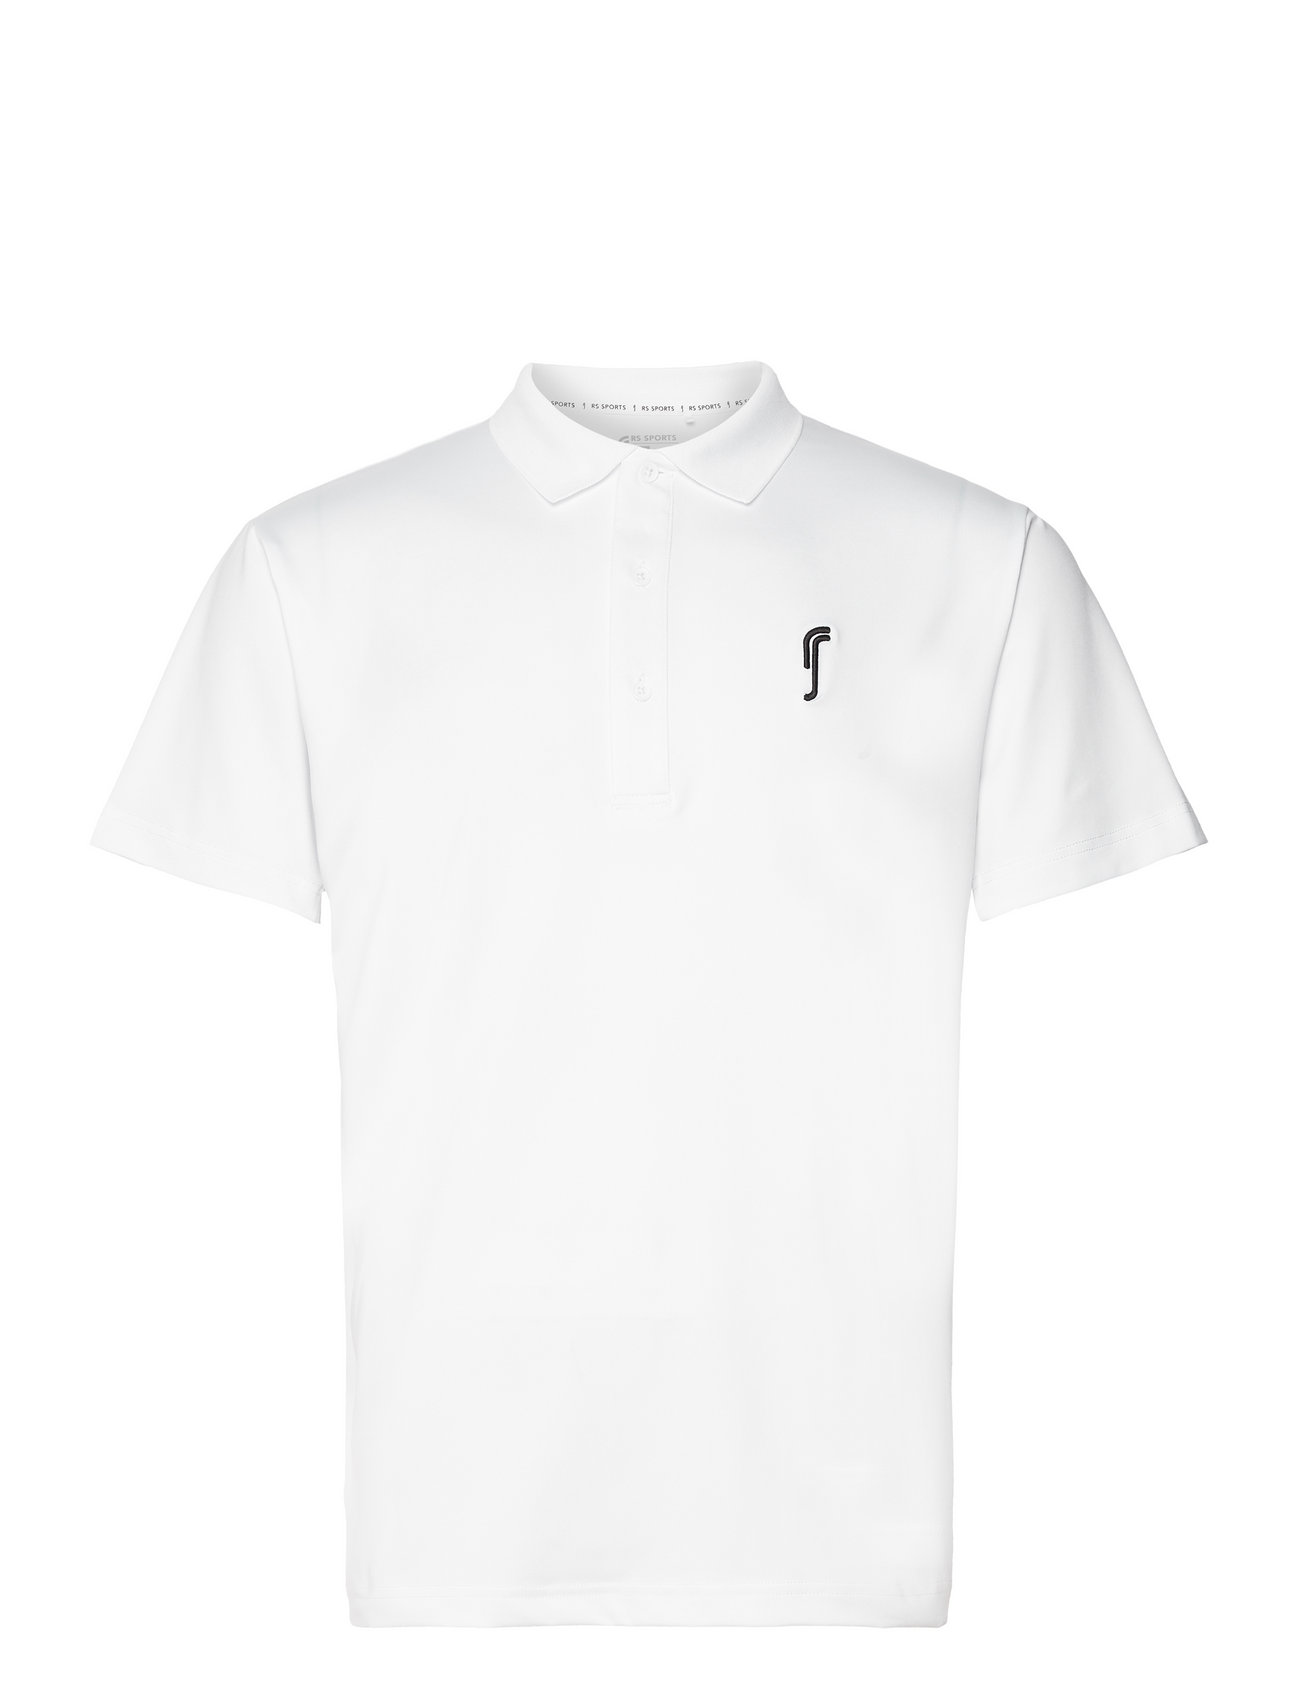 Men’s Performance Polo Sport Polos Short-sleeved White RS Sports